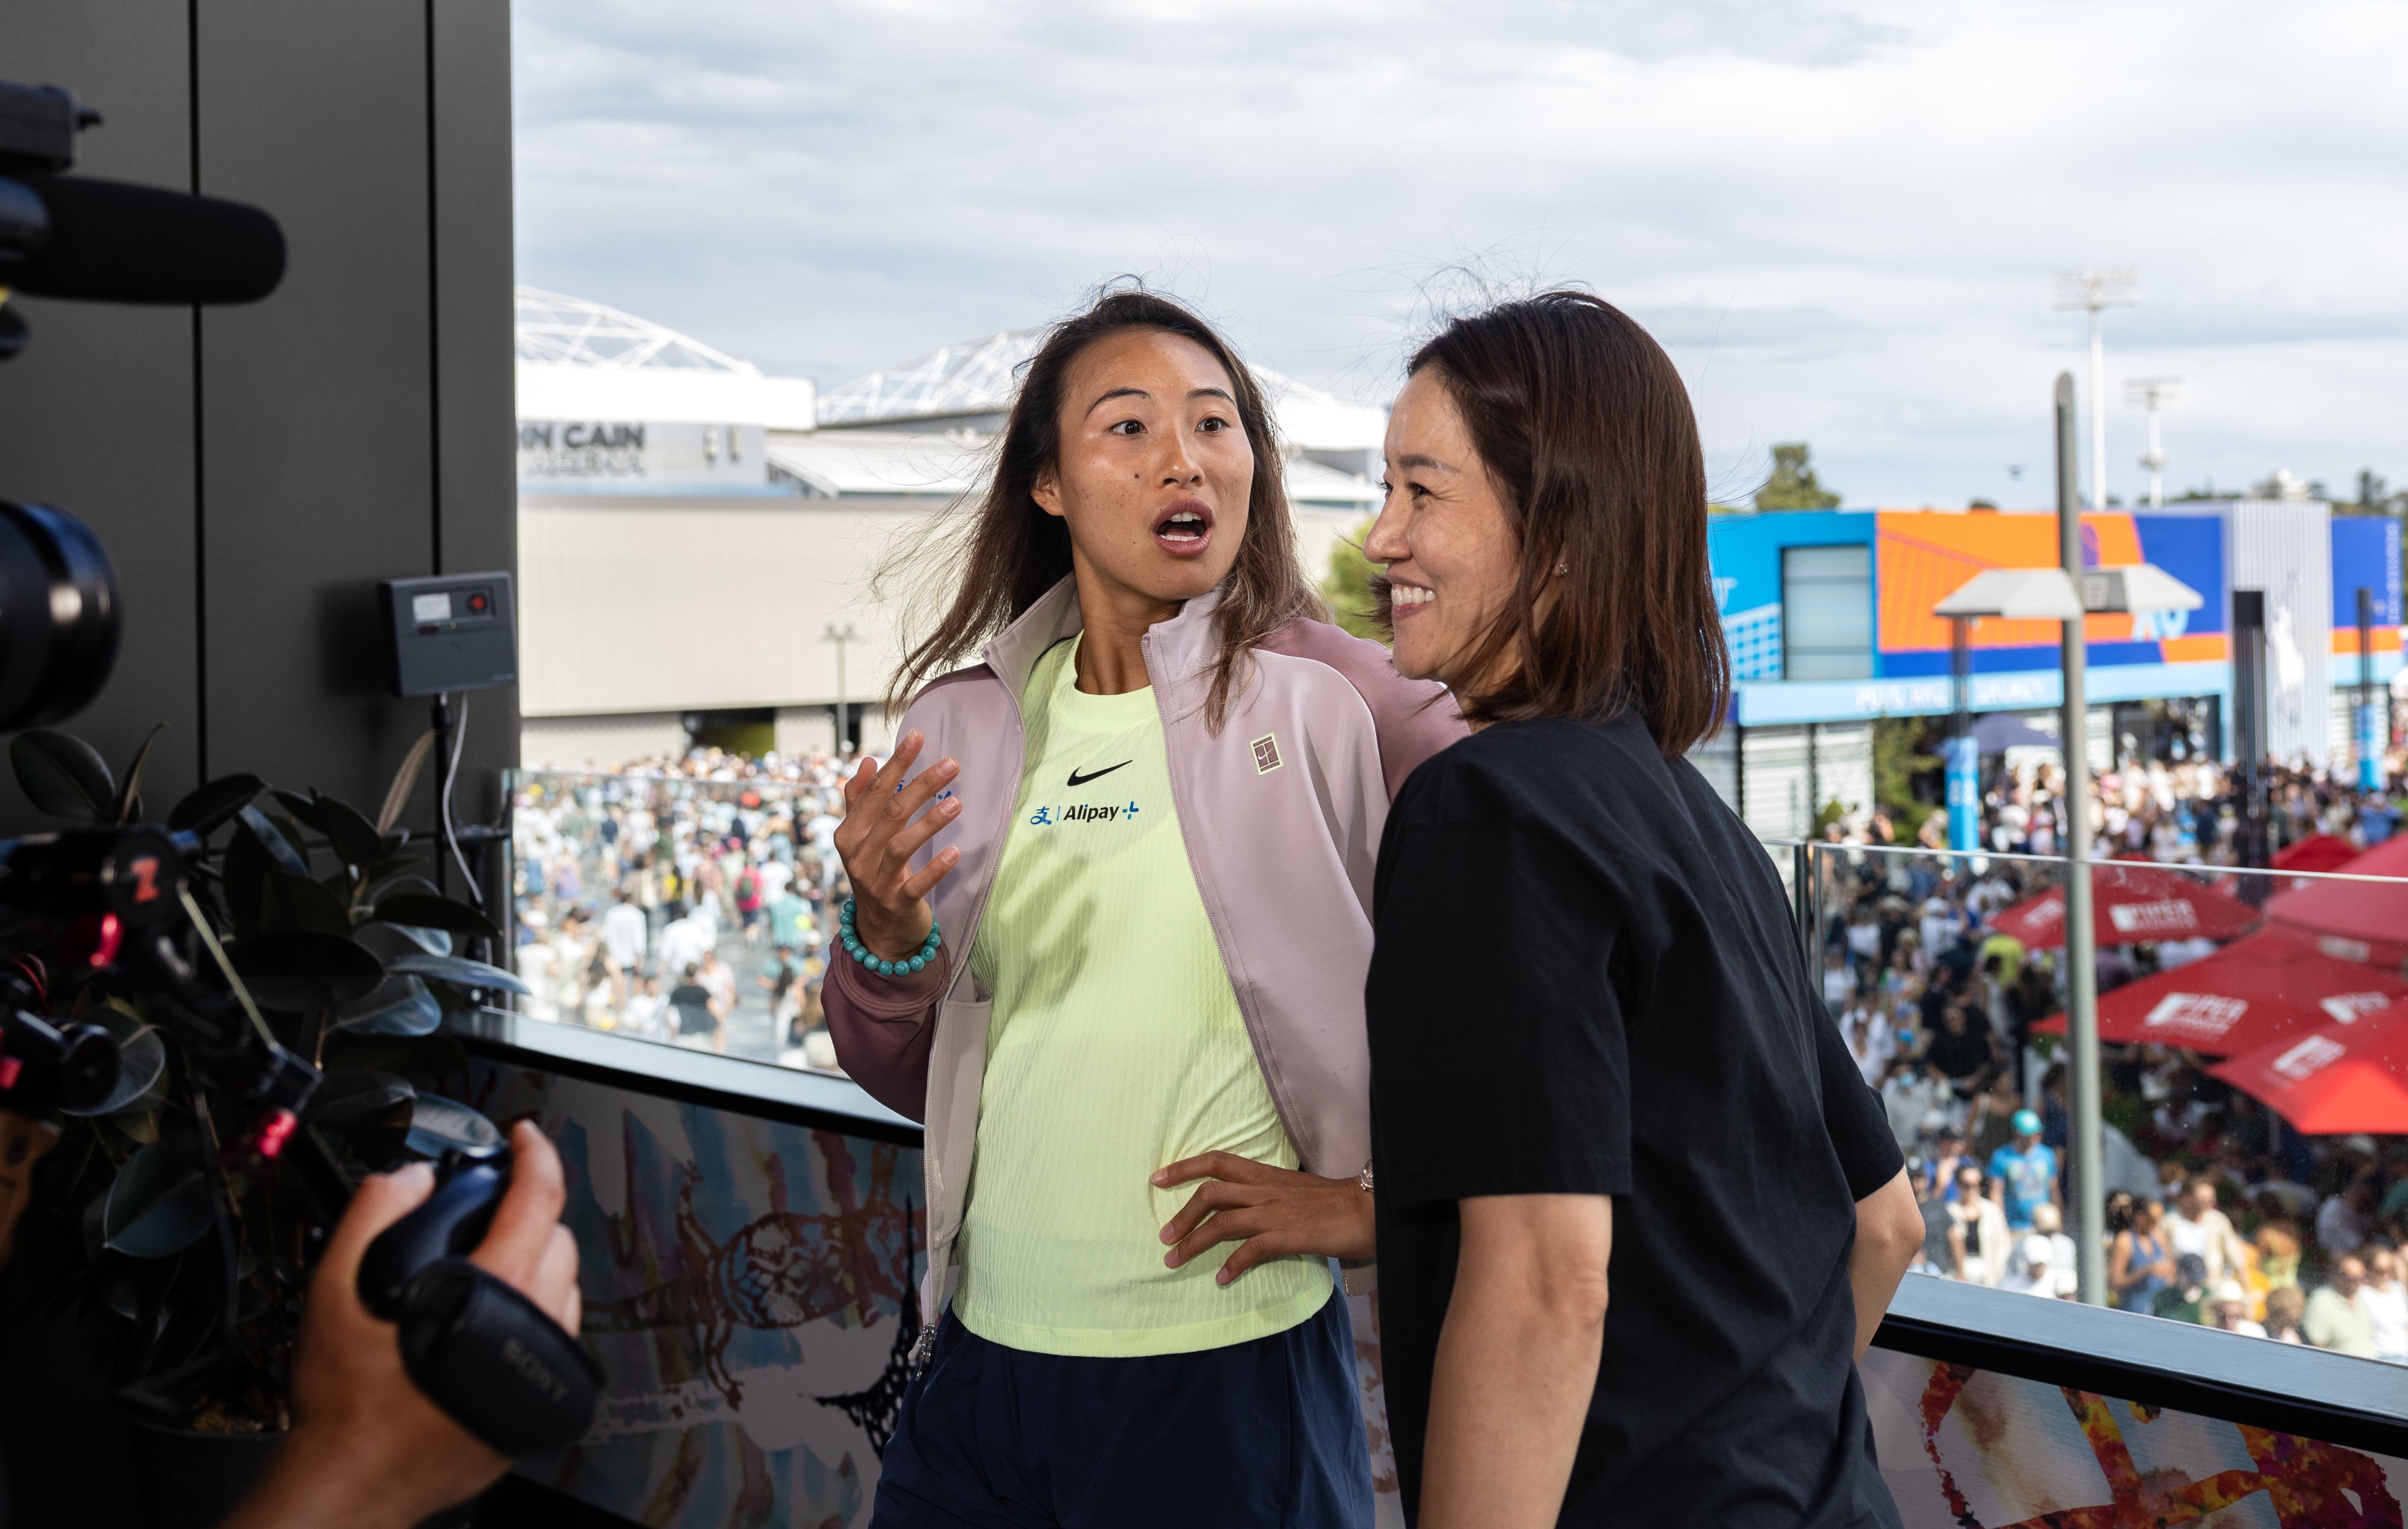 China's Zheng Qinwen (L) reacts after her hero Li Na appears during a TV interview at the Australian Open in Melbourne, Australia, January 20, 2024. /CFP